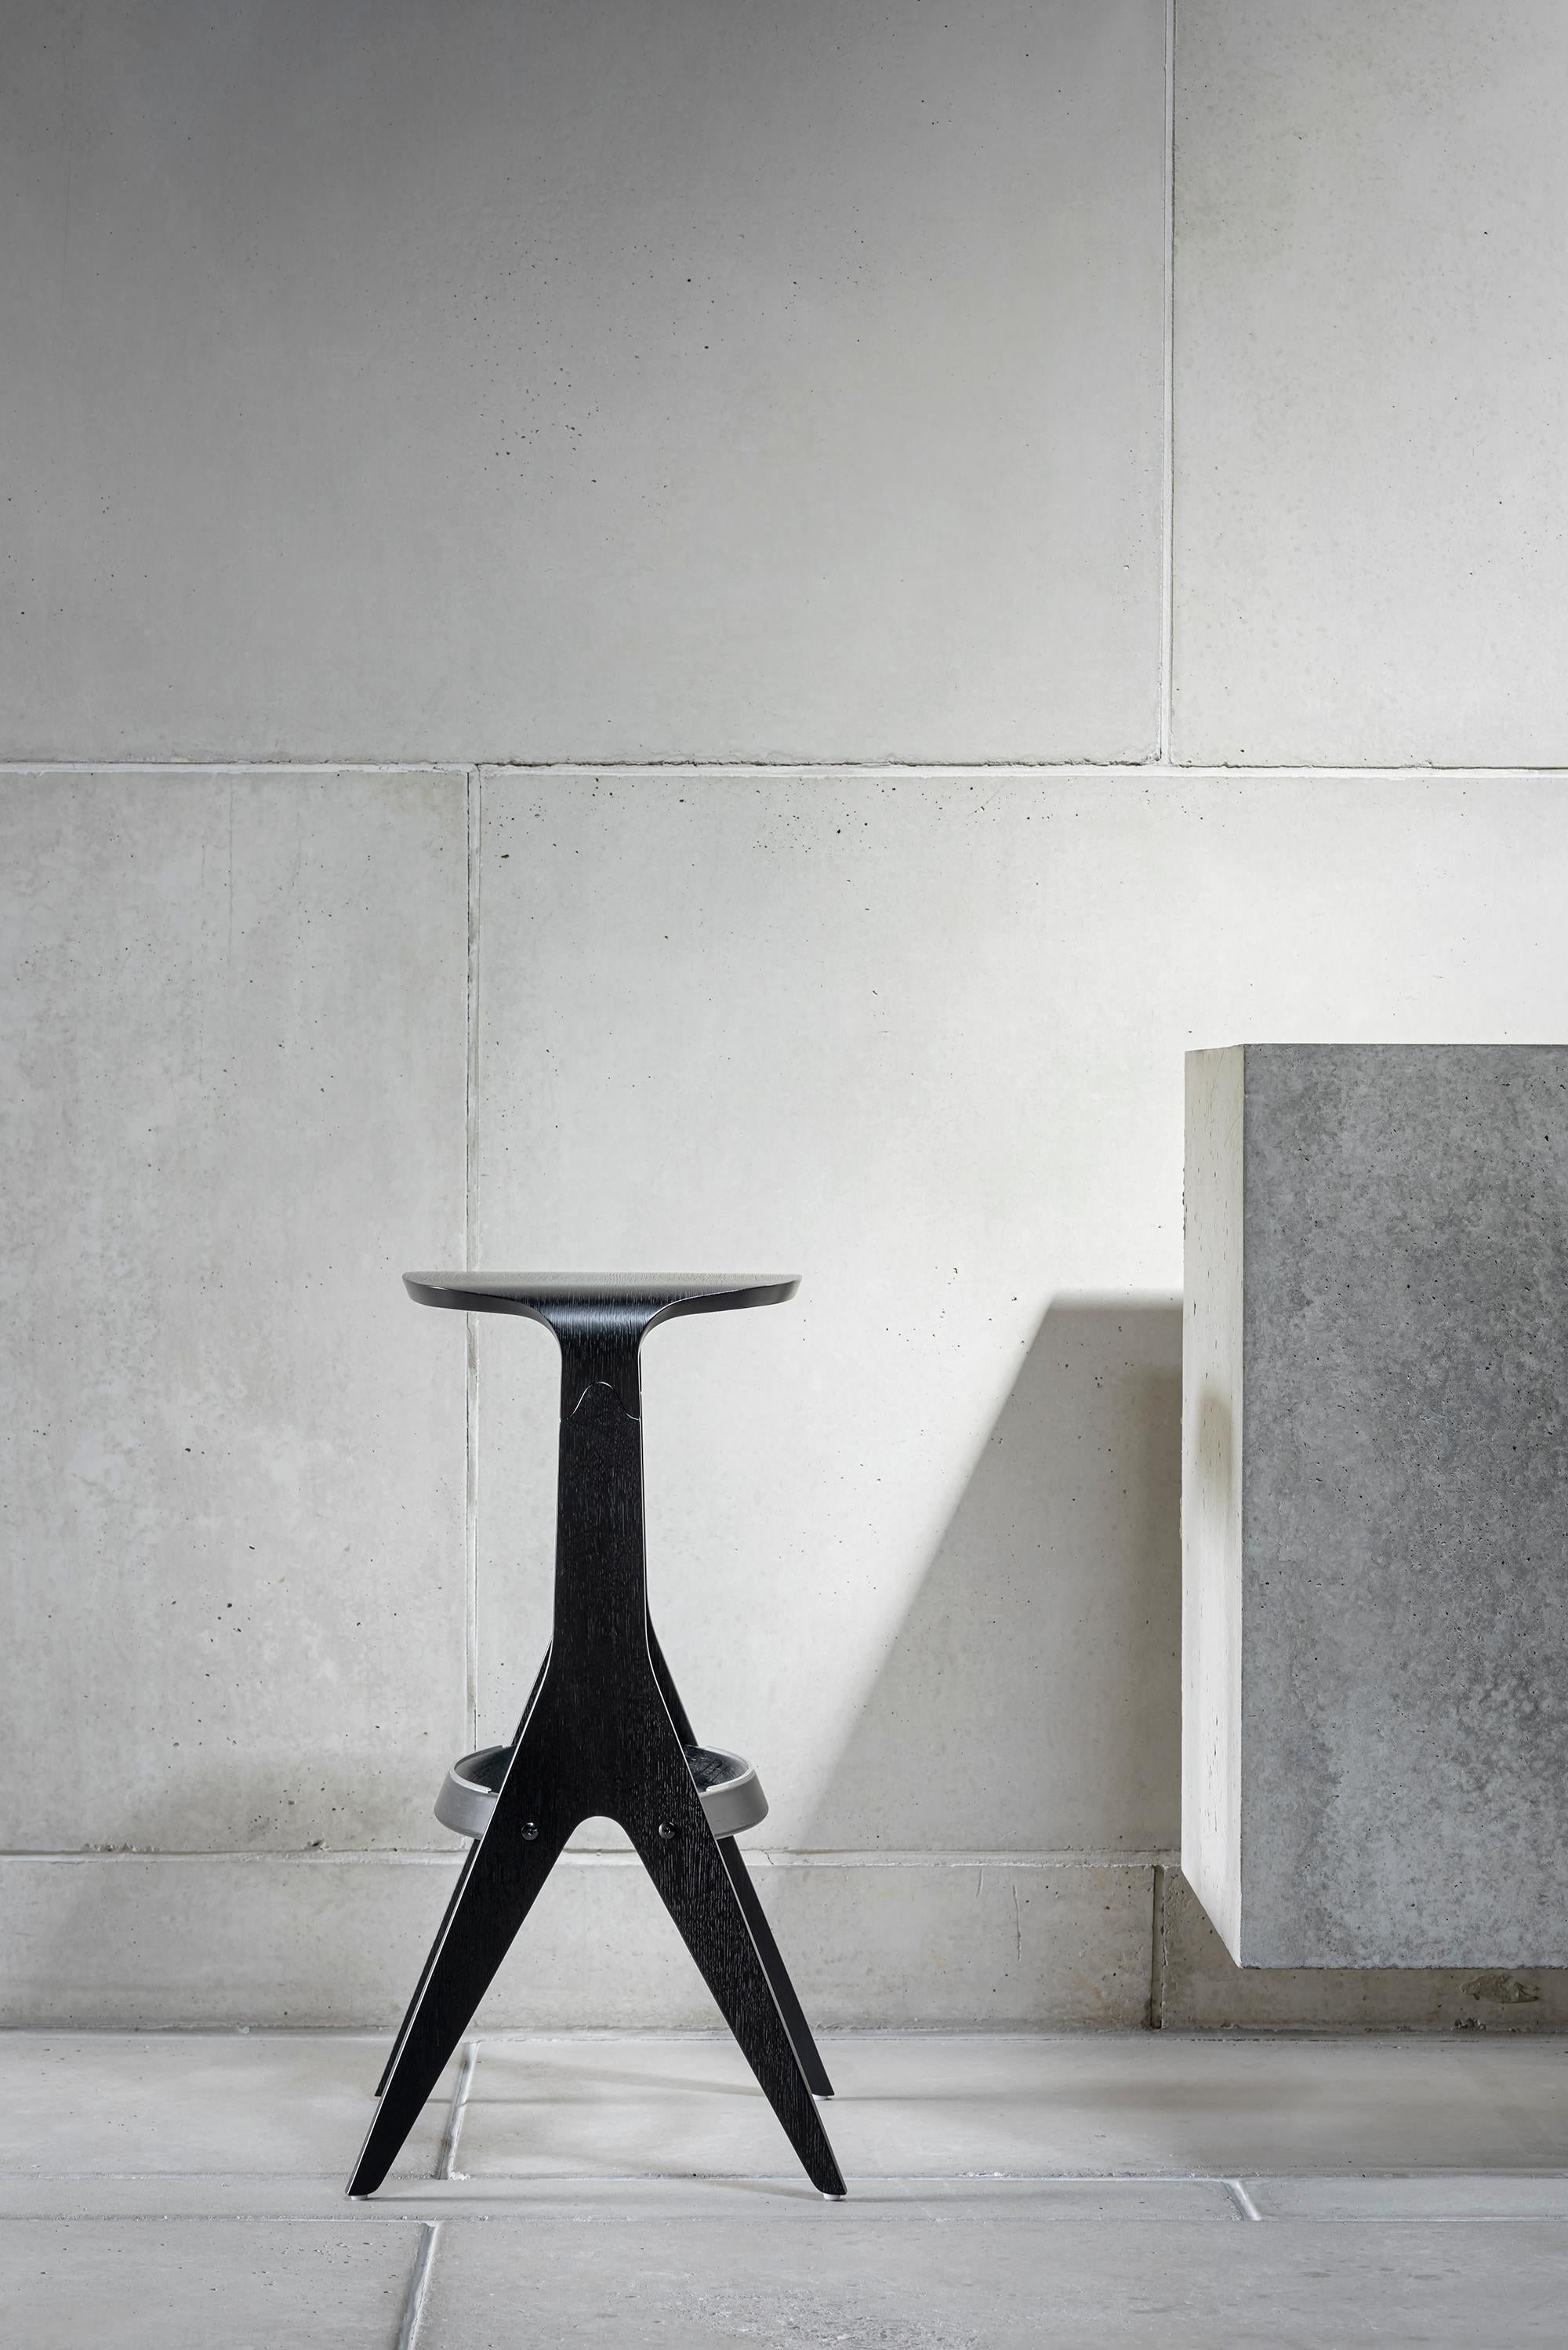 Counter stool Lavitta 65 by Poiat
Designers: Timo Mikkonen & Antti Rouhunkoski 
Lavitta 2020

Model shown: Black oak 
Dimensions: H. 75 x 50 x 44 cm

The latest member of the Lavitta Collection, the Lavitta Counter Stool continues focusing on